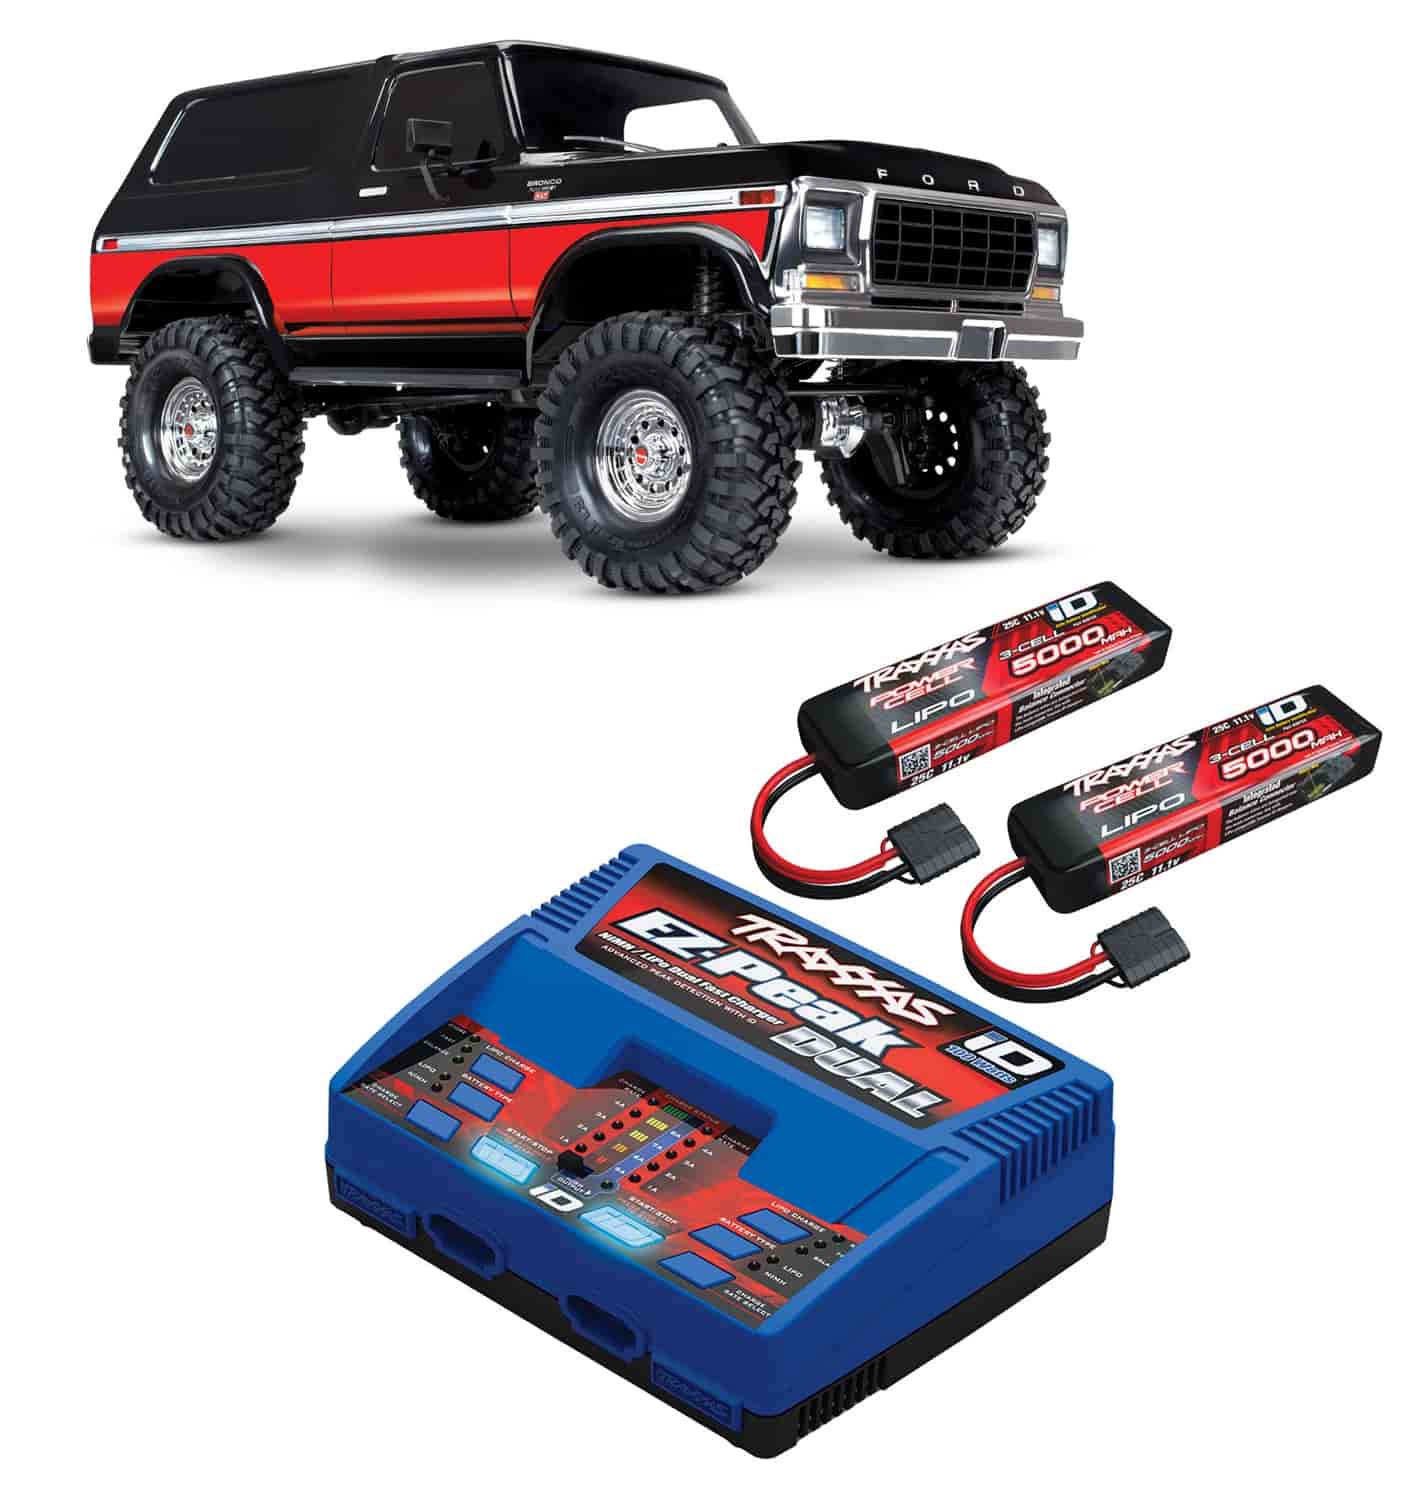 For Ford Traxxas TRX4 Bronco 82046-4 Remote Control Car Front Bumper With Lights